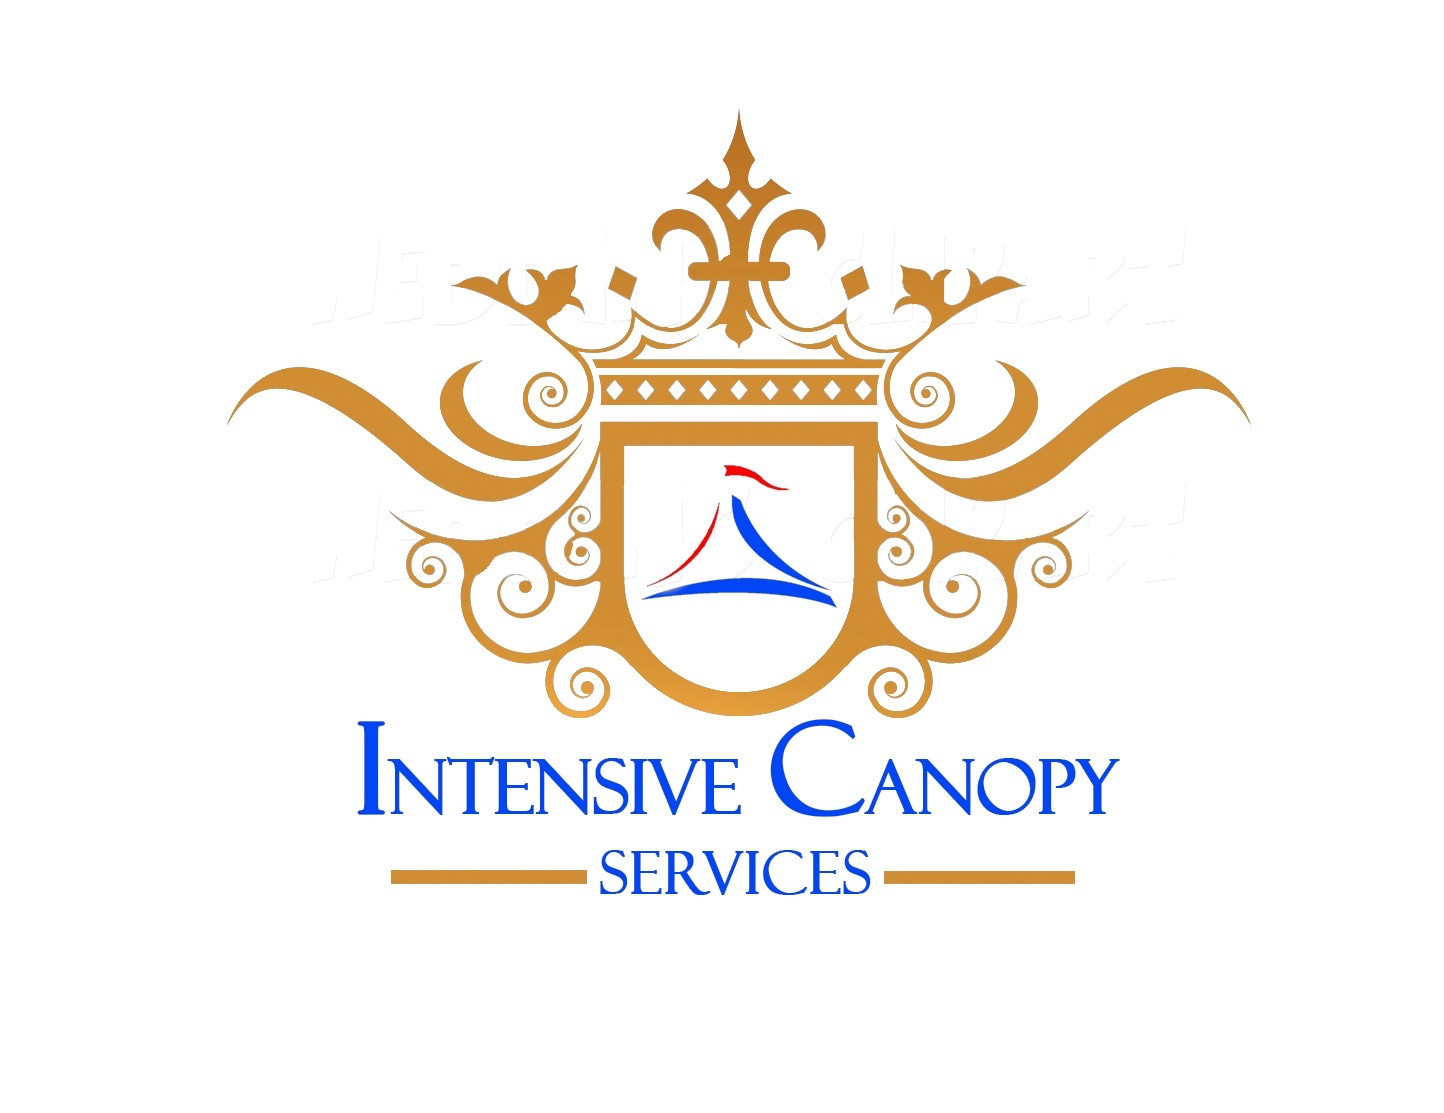 Intensive canopy services